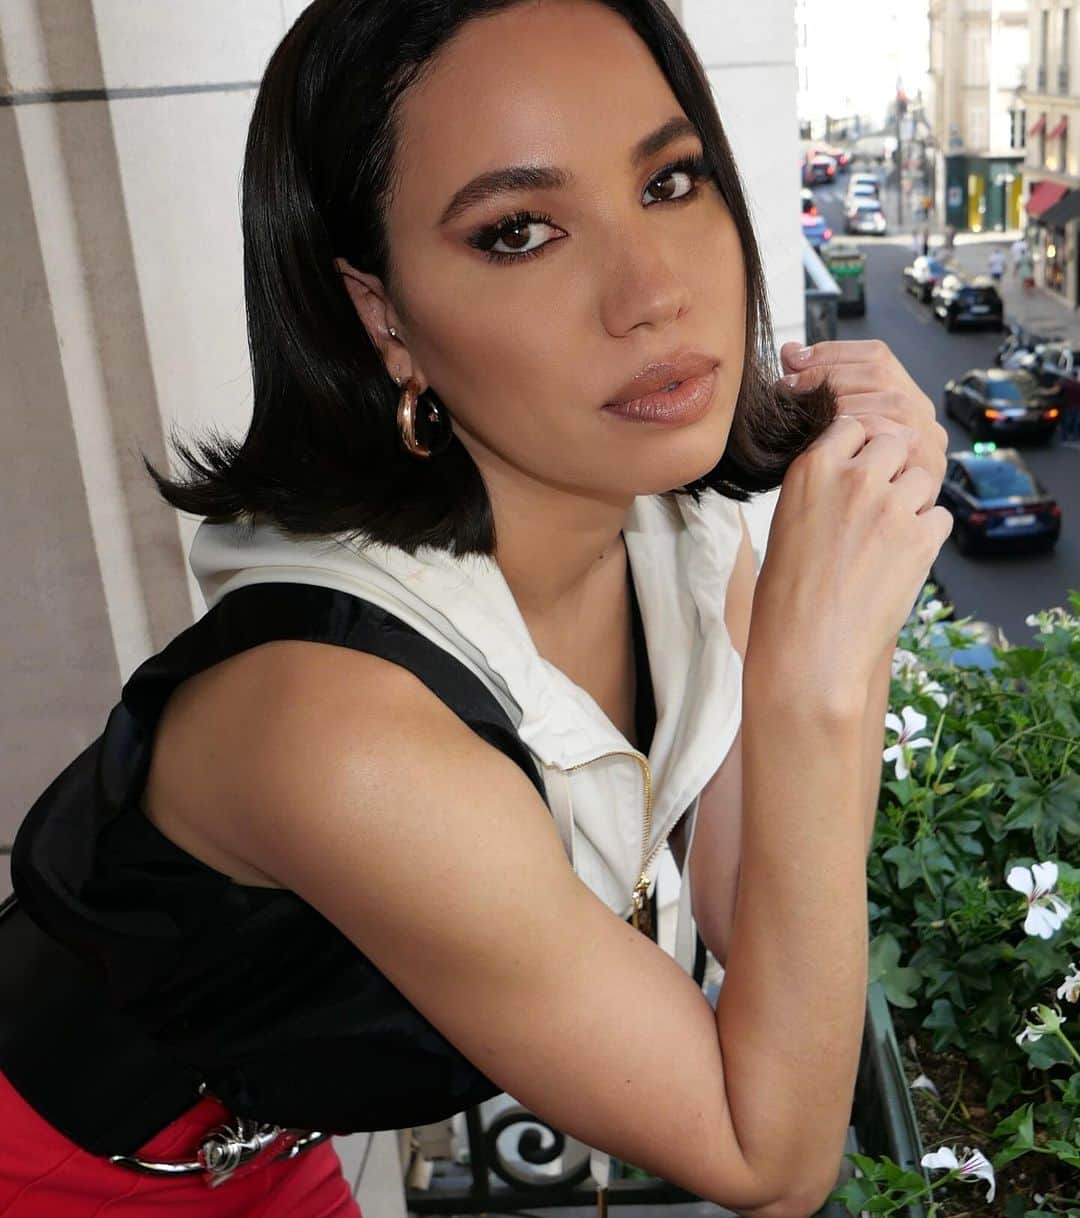 Vincent Oquendoのインスタグラム：「Peaches & cream skin on #Jurneesmollett for @louisvuitton show today styled by @mandelkorn hair by @naivashaintl #MakeupByVincent using @bioeffectofficial to prep we used imprinting hydrogel mask to pamper her skin because she was fresh off a flight. Then I applied the a few drops of Egf serum to her face and neck because that gives my clients skin an other worldly glow under their makeup. I then  followed with the hydrating Cream that I warmed up on my finger tips and gently pressed into her skin and followed with the OSA water mist before applying her makeup ✨ @beauty4beautyproject」